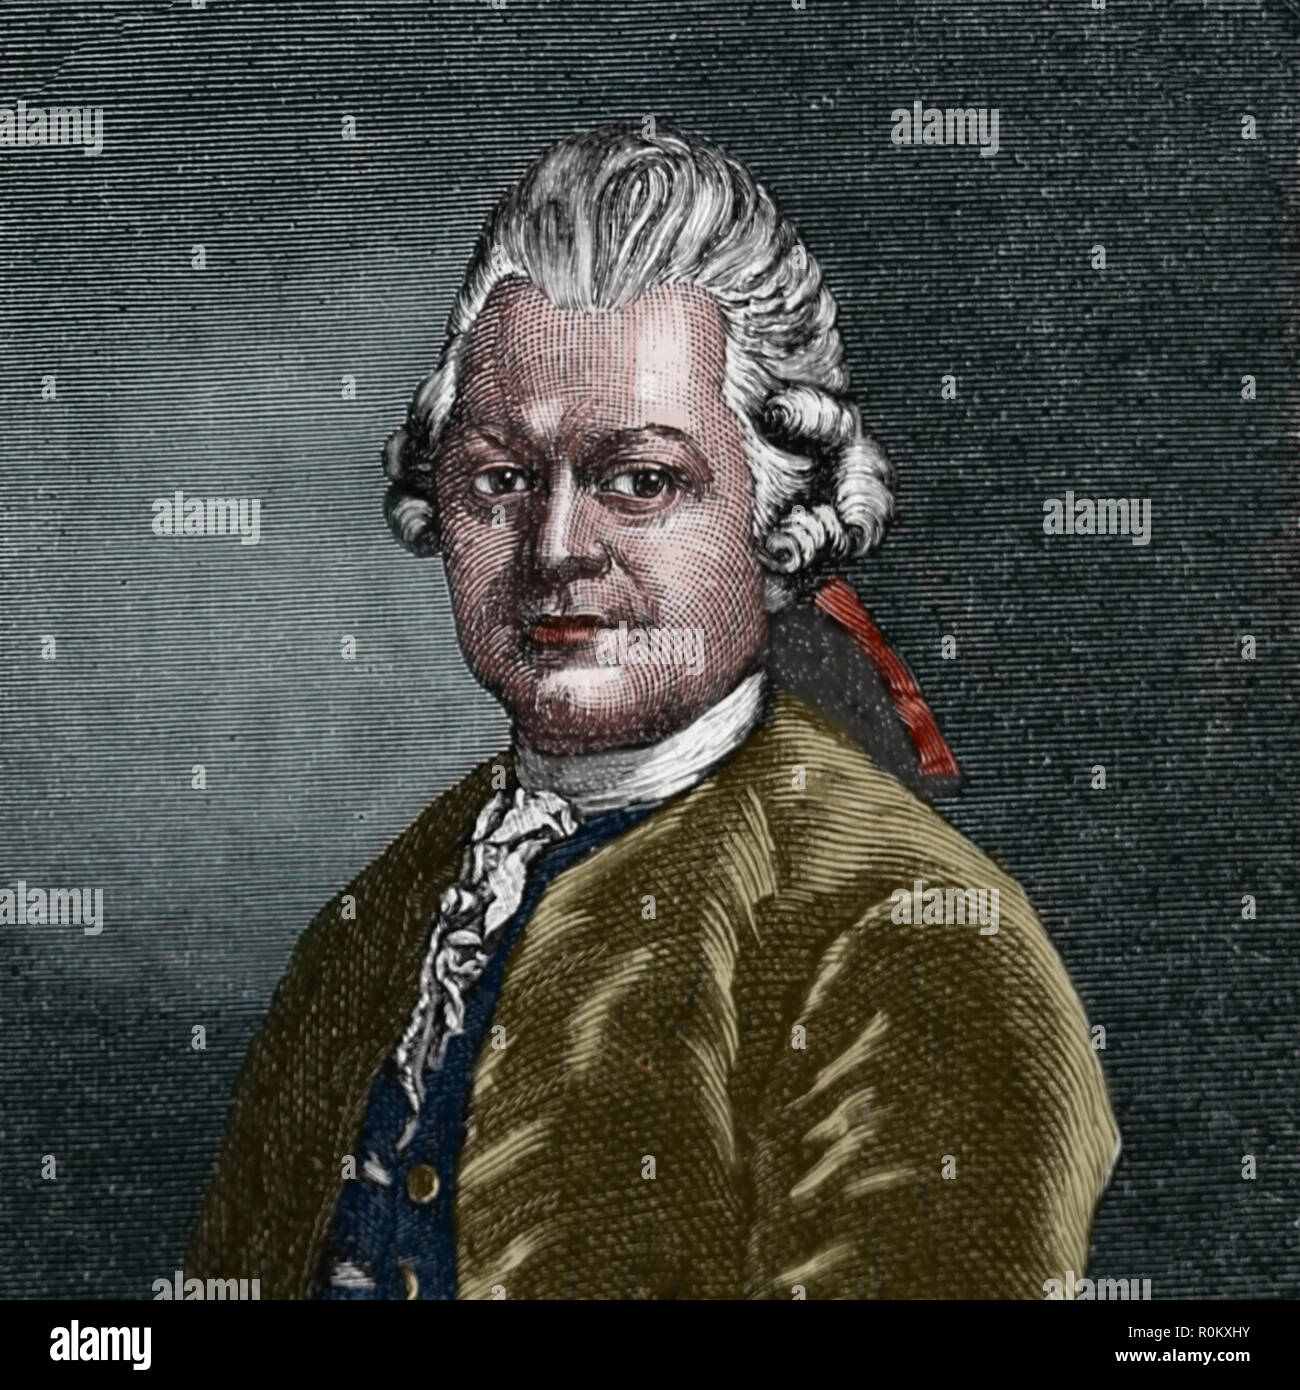 Gotthold Ephraim Lessing (1729-1781). German writer and drramatist. Enlightenment era. Engraving of Germania, 1882. Stock Photo